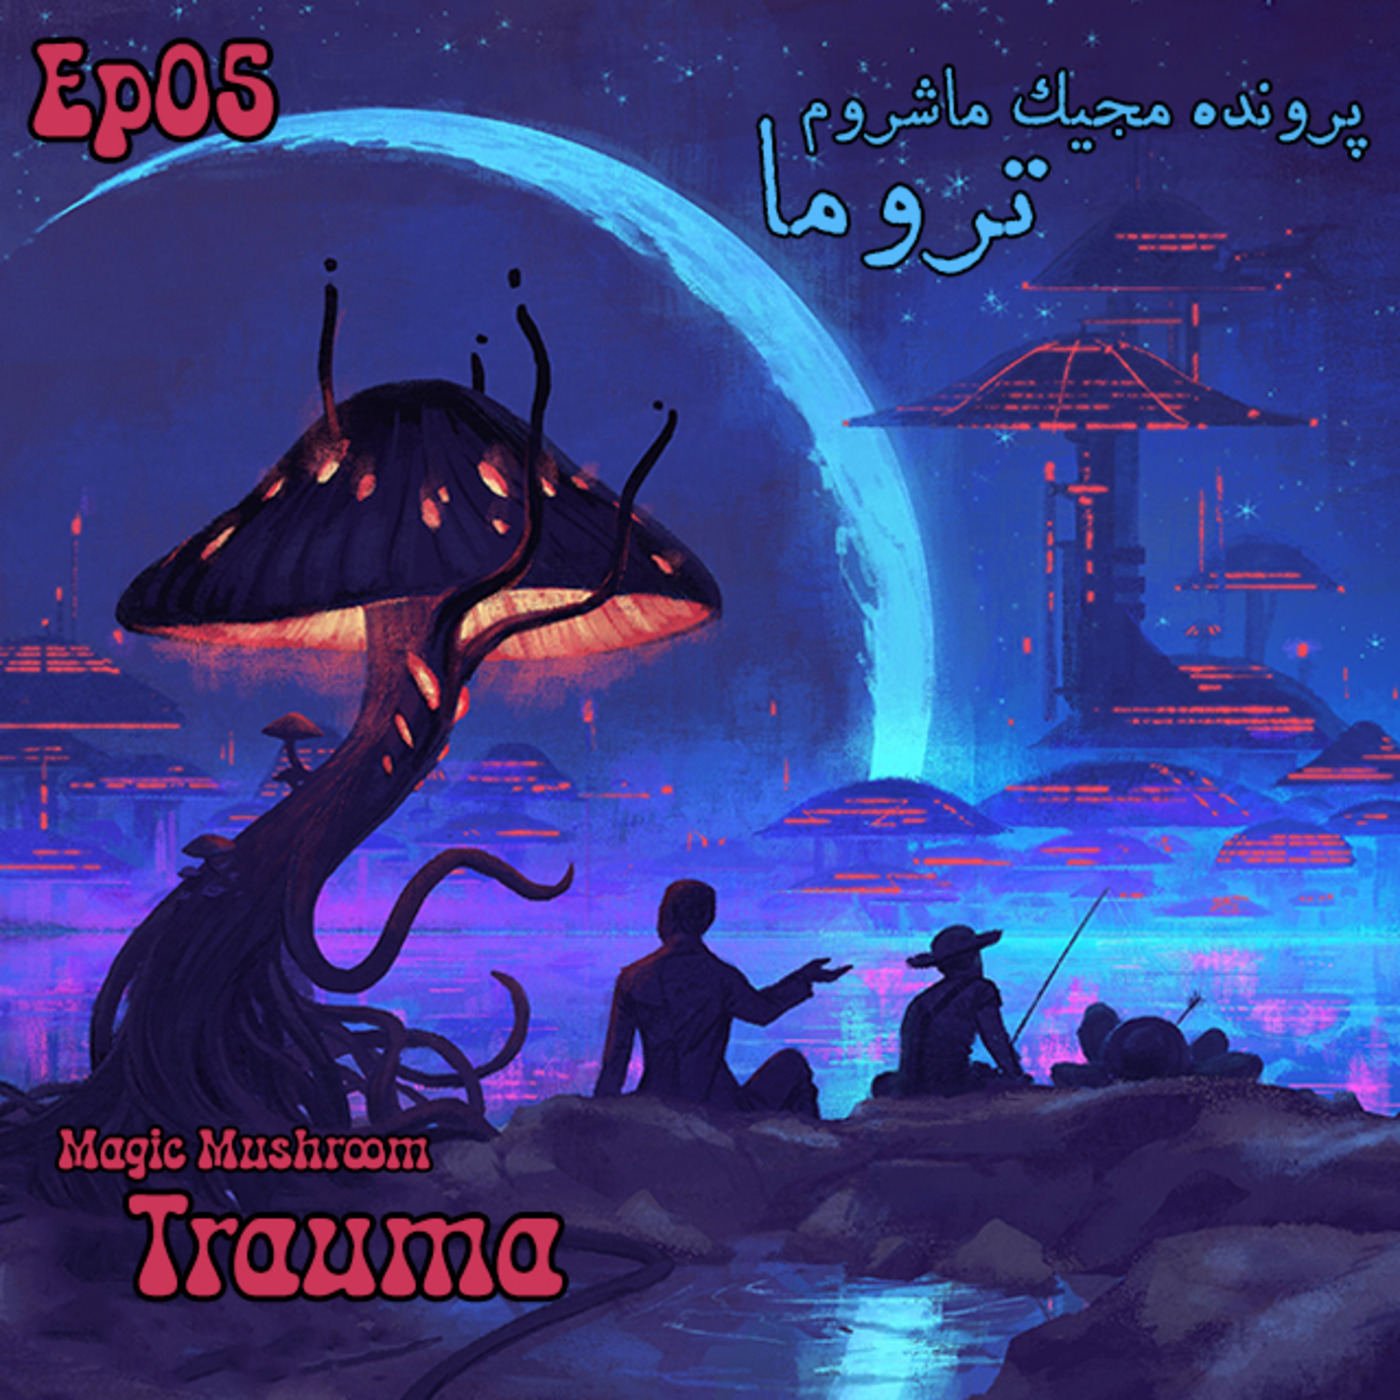 Ep05 - مجیک ماشروم - تروما